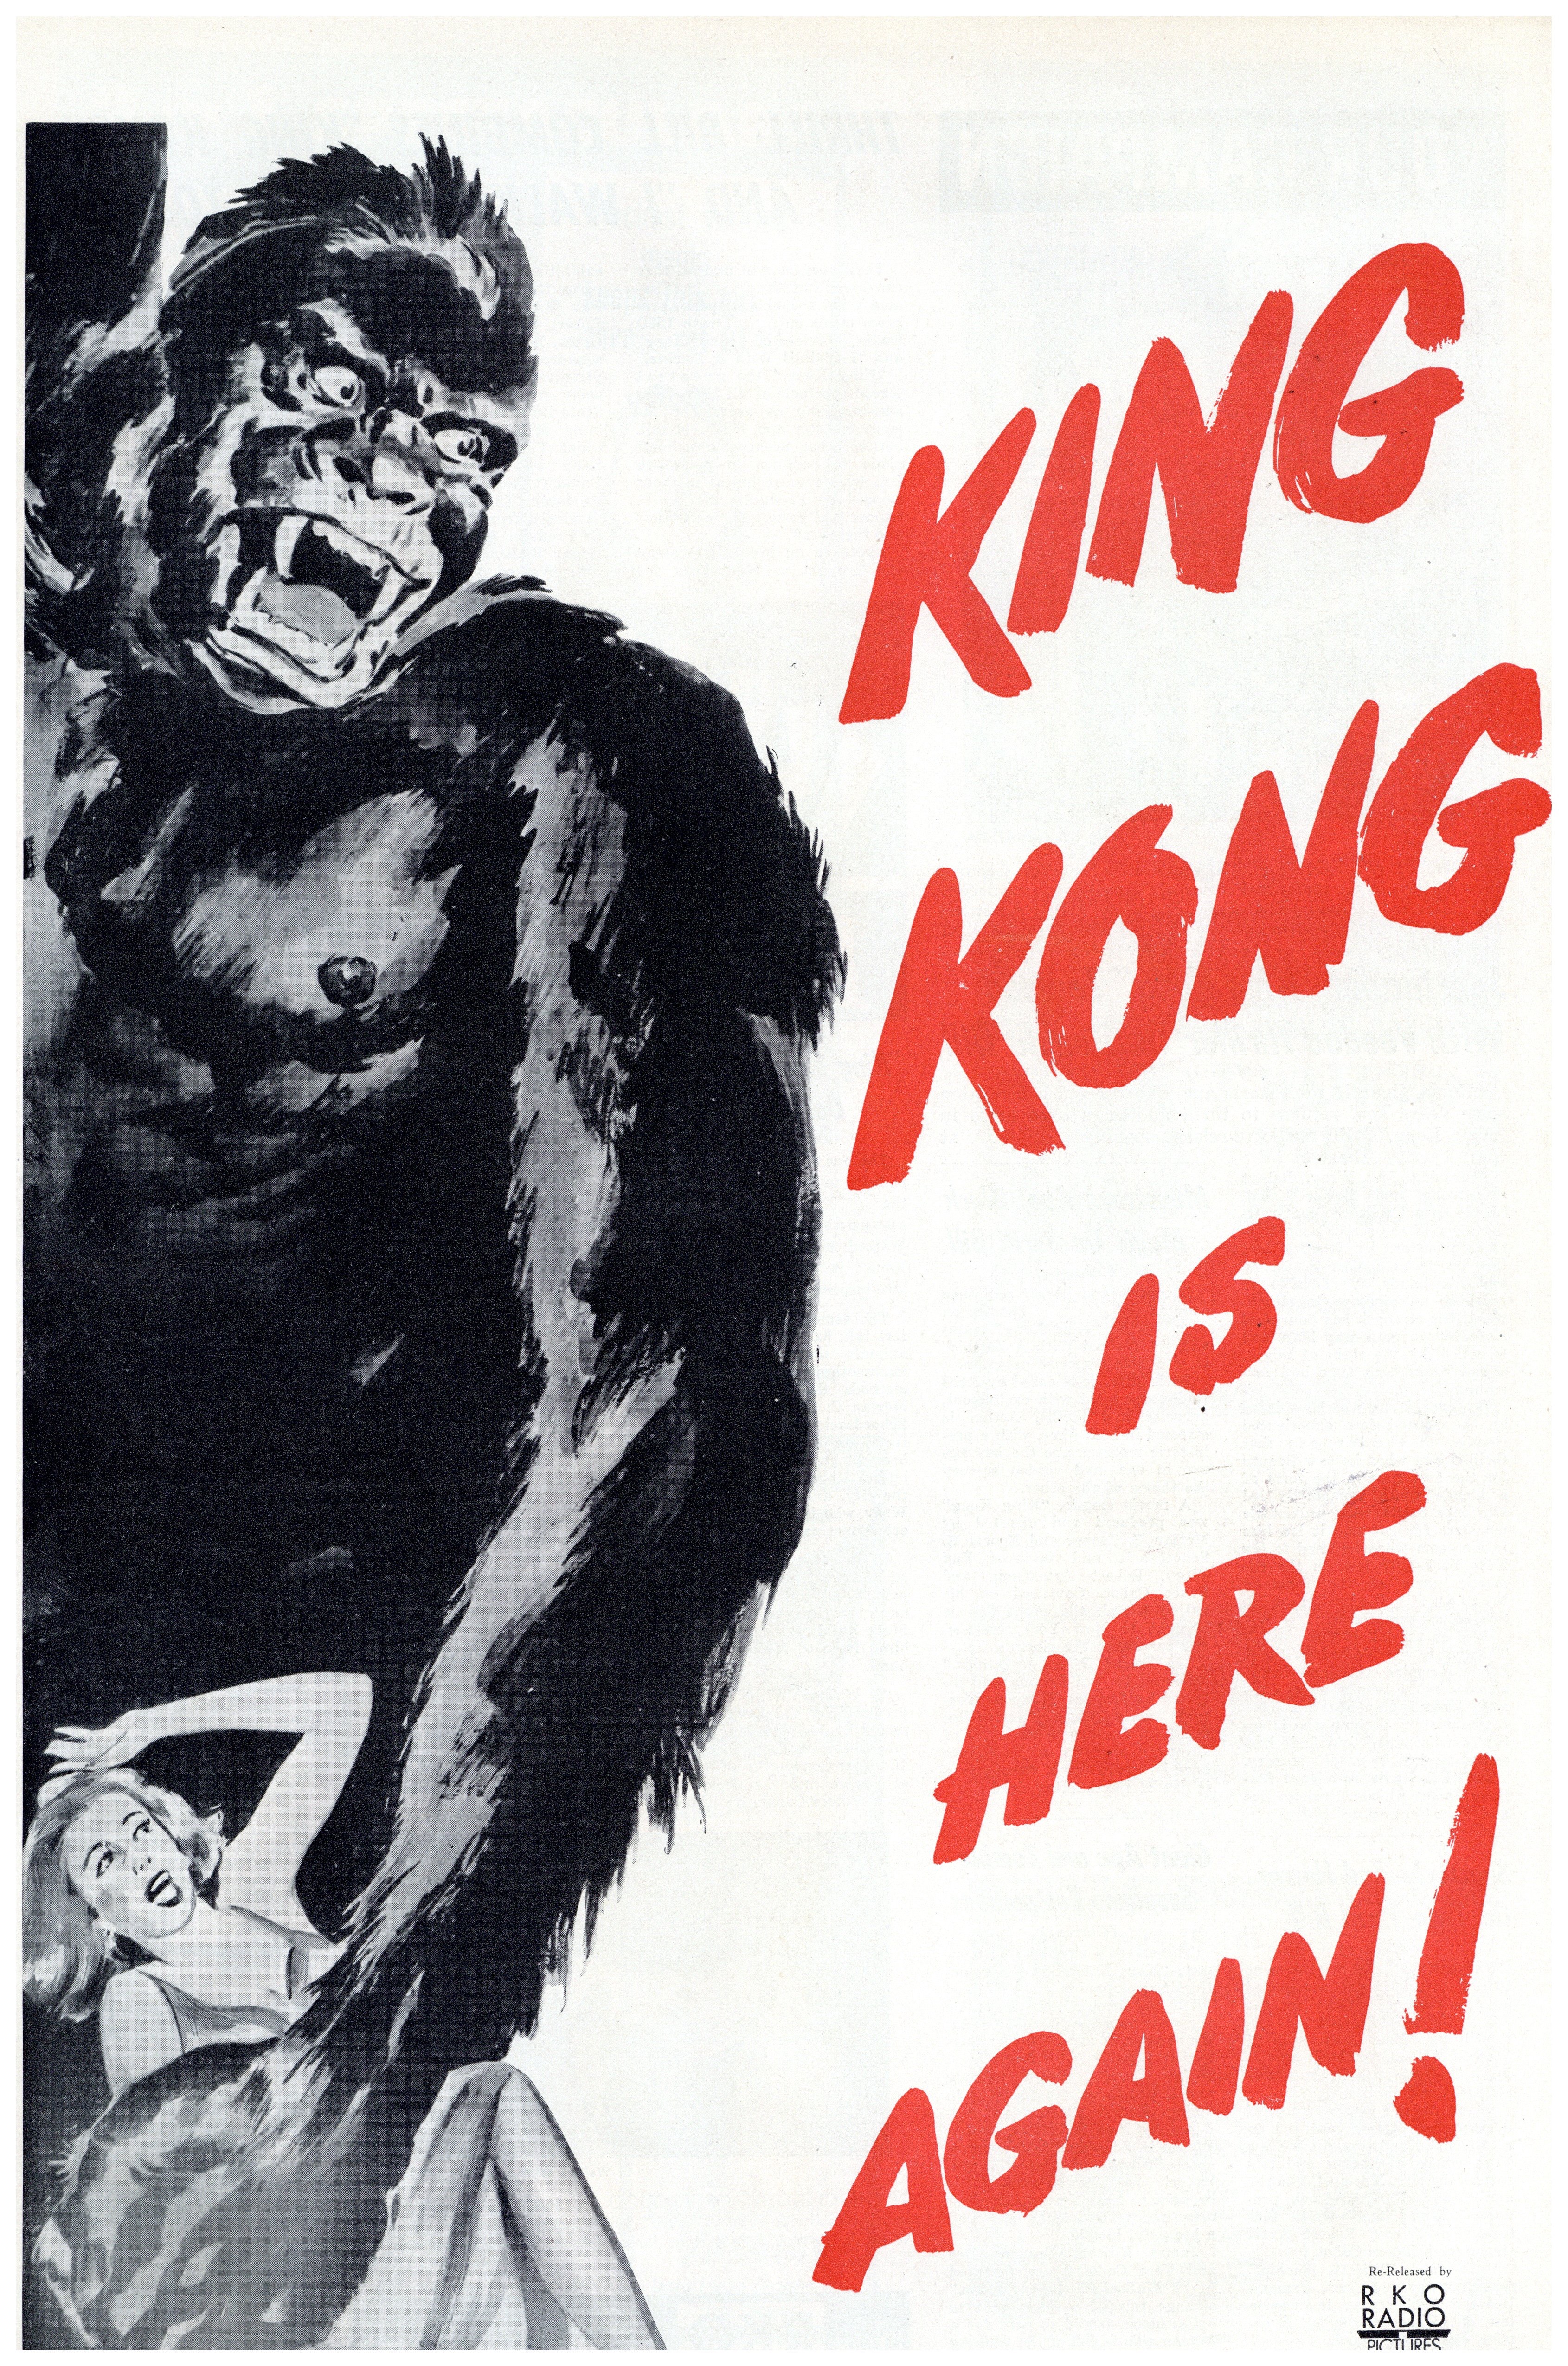 King Kong R-1956 - Primary